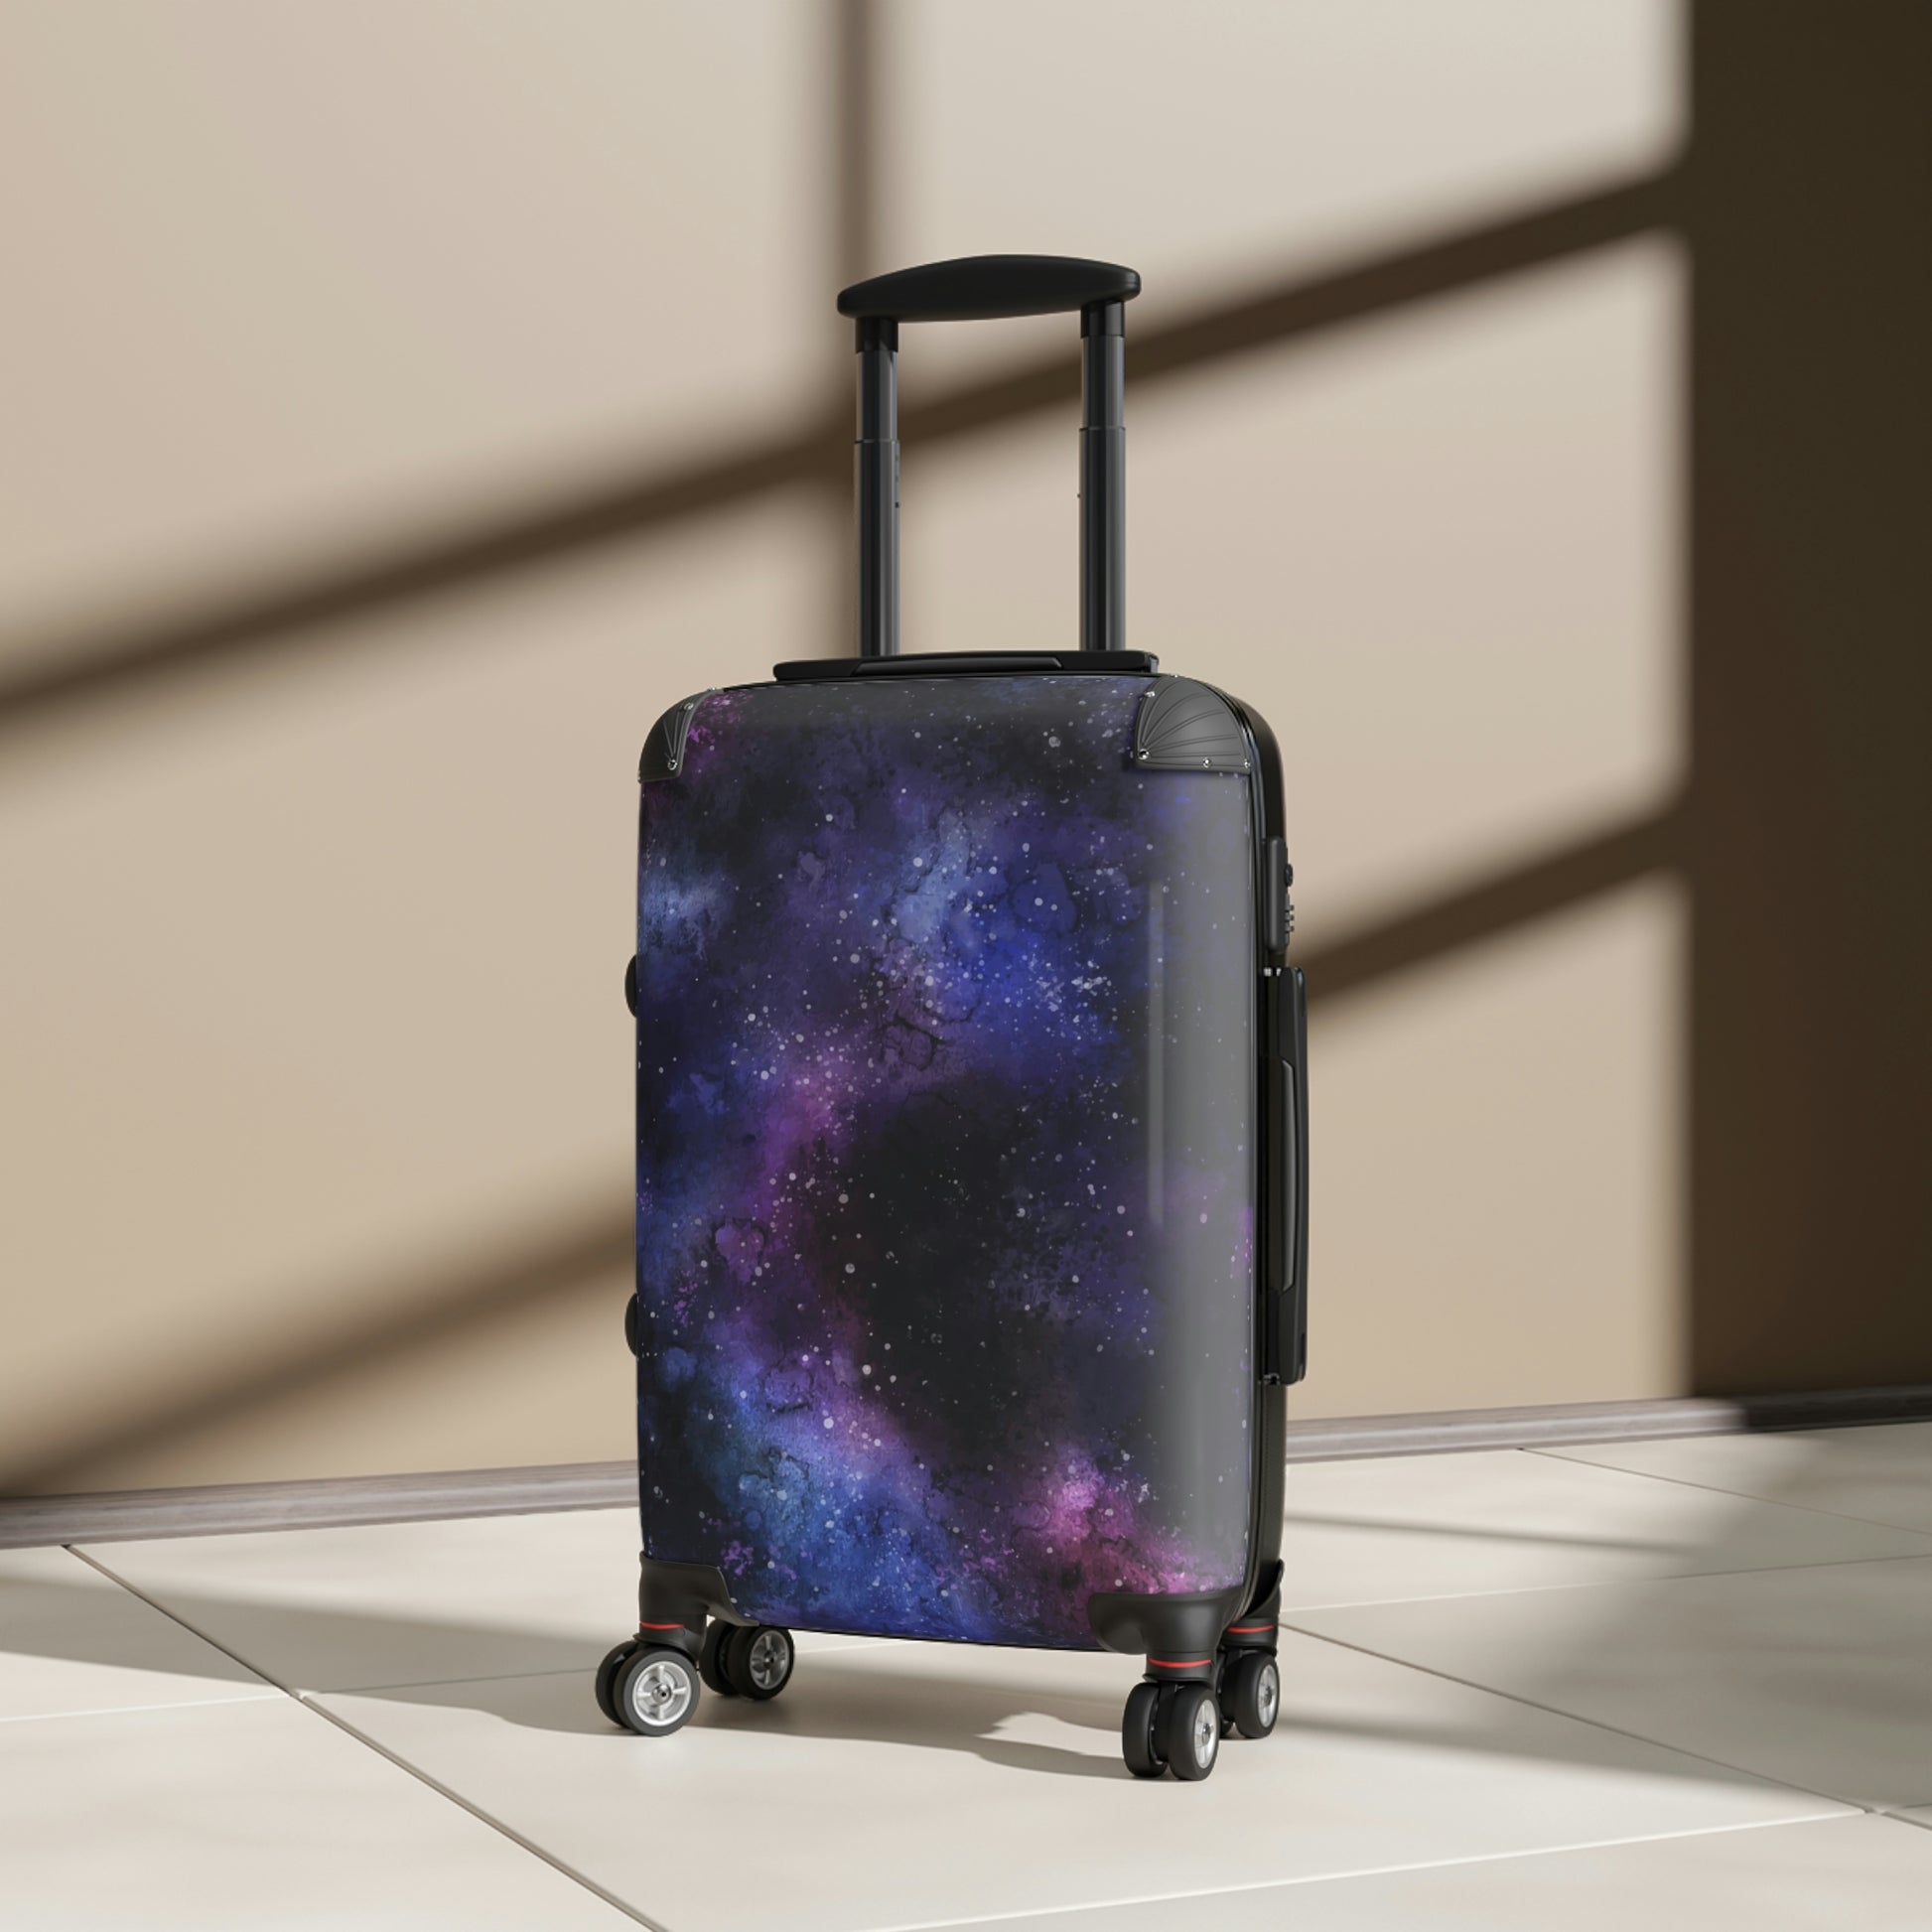 Galaxy Cabin Suitcase Luggage, Space Stars Purple Universe Carry On Travel Bag Rolling Spinner with Lock Designer Hard Shell Wheels Case Starcove Fashion